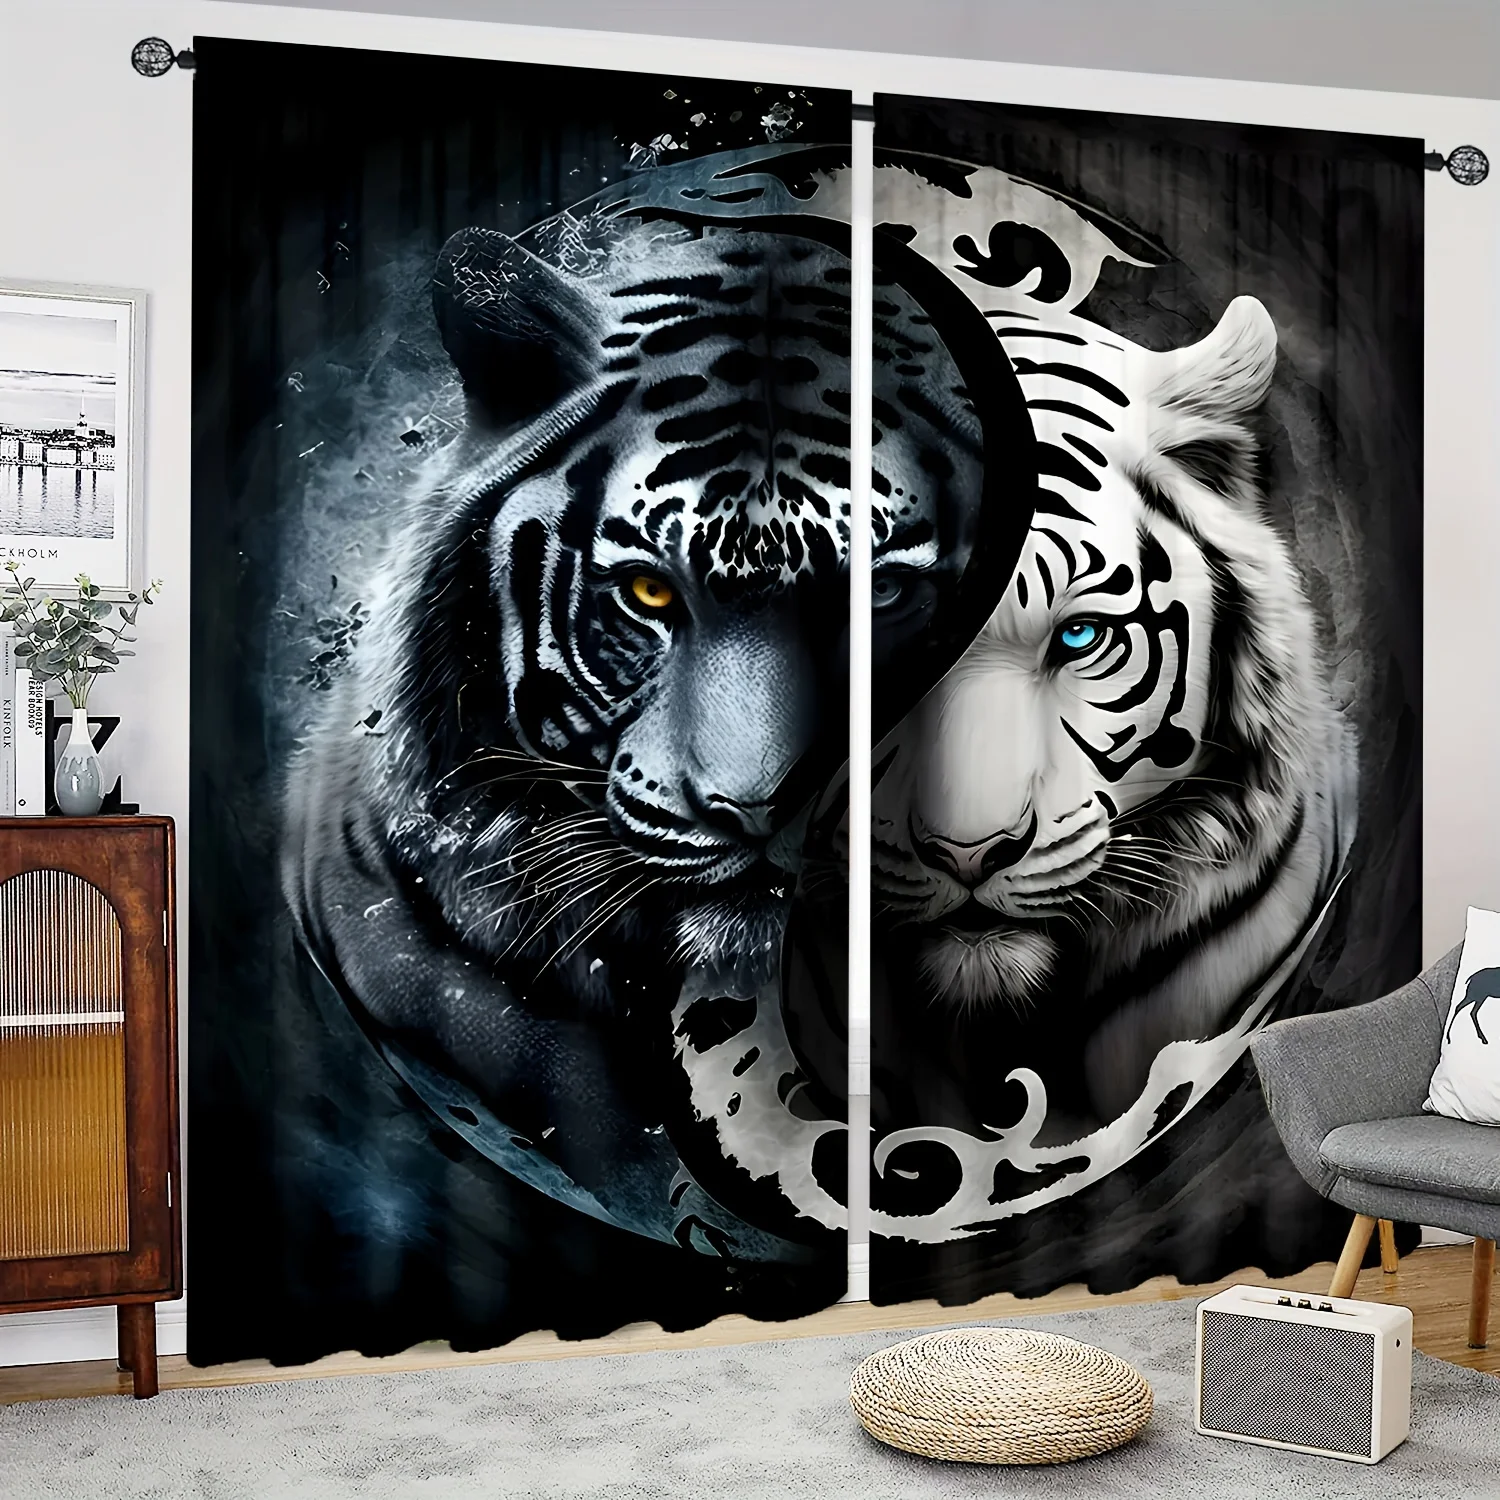 

3D Digital Print Cheap Custom Animal Lion Tiger Two Thin Window Curtains for Living Room Bedroom Decor 2 Pieces Free Shipping